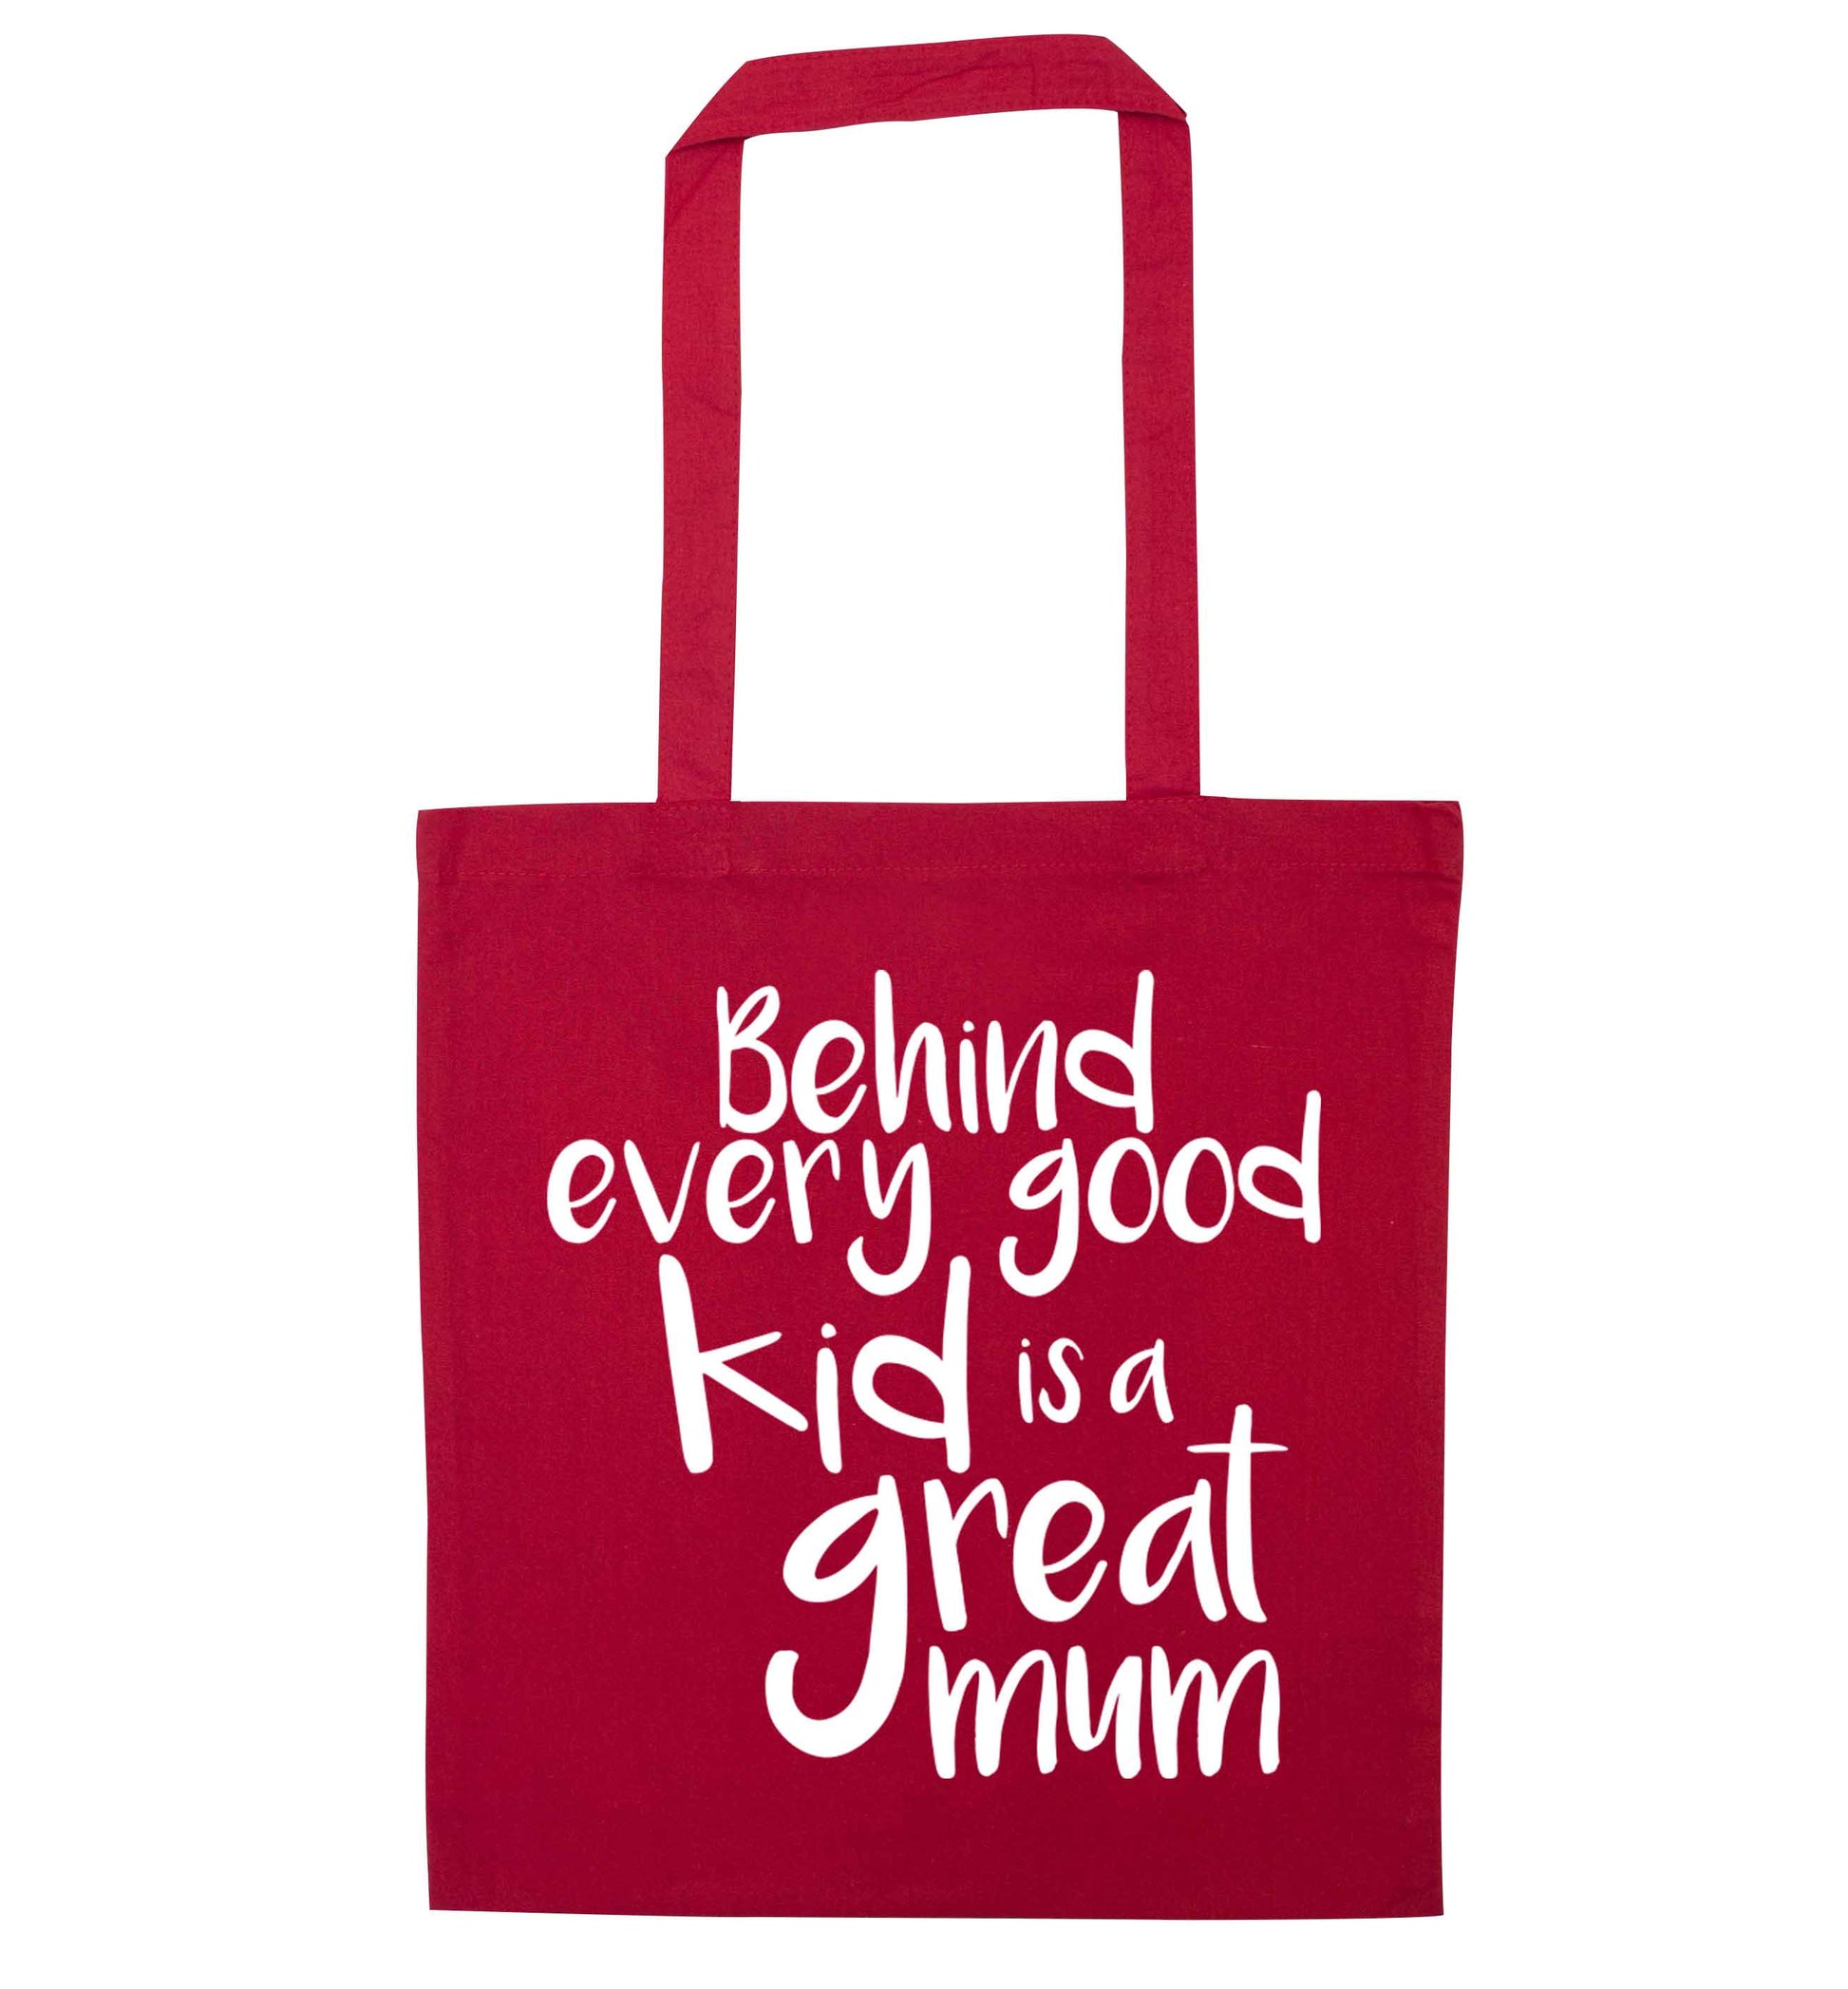 Behind every good kid is a great mum red tote bag